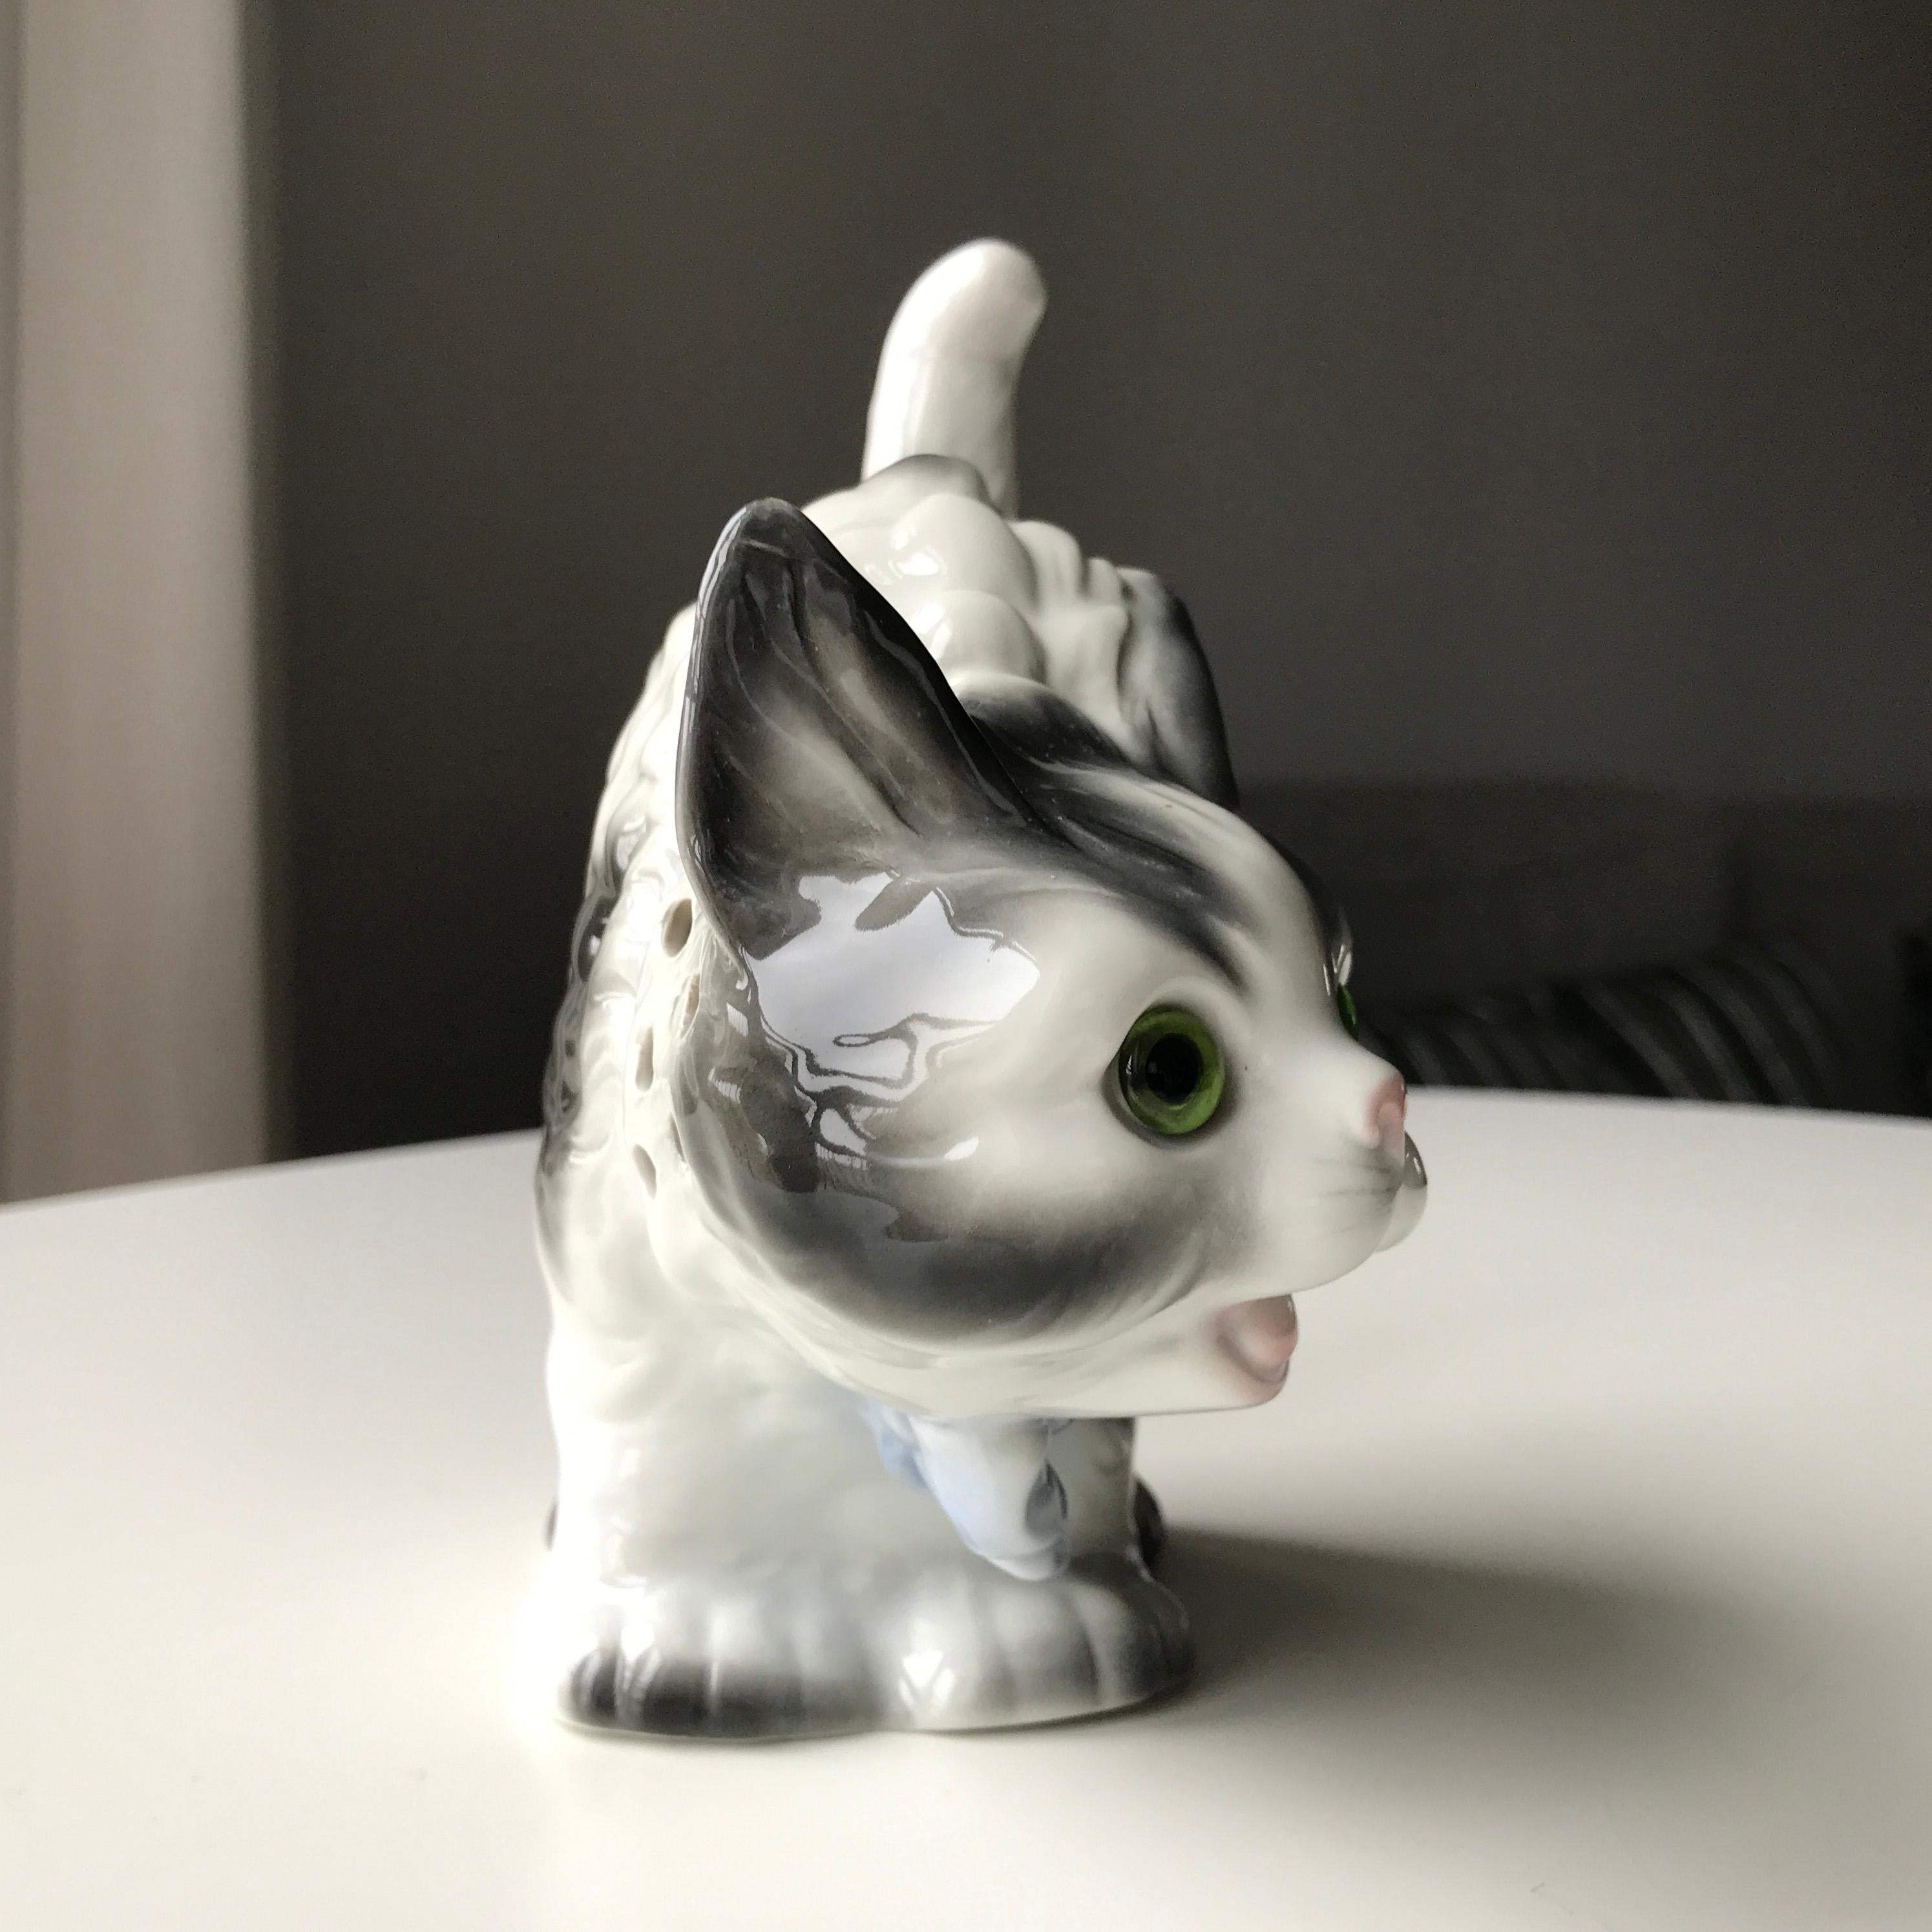 Danish Cat Figurine Lamp Early 20th Century Ozon Table Lamp by Fog and Morup